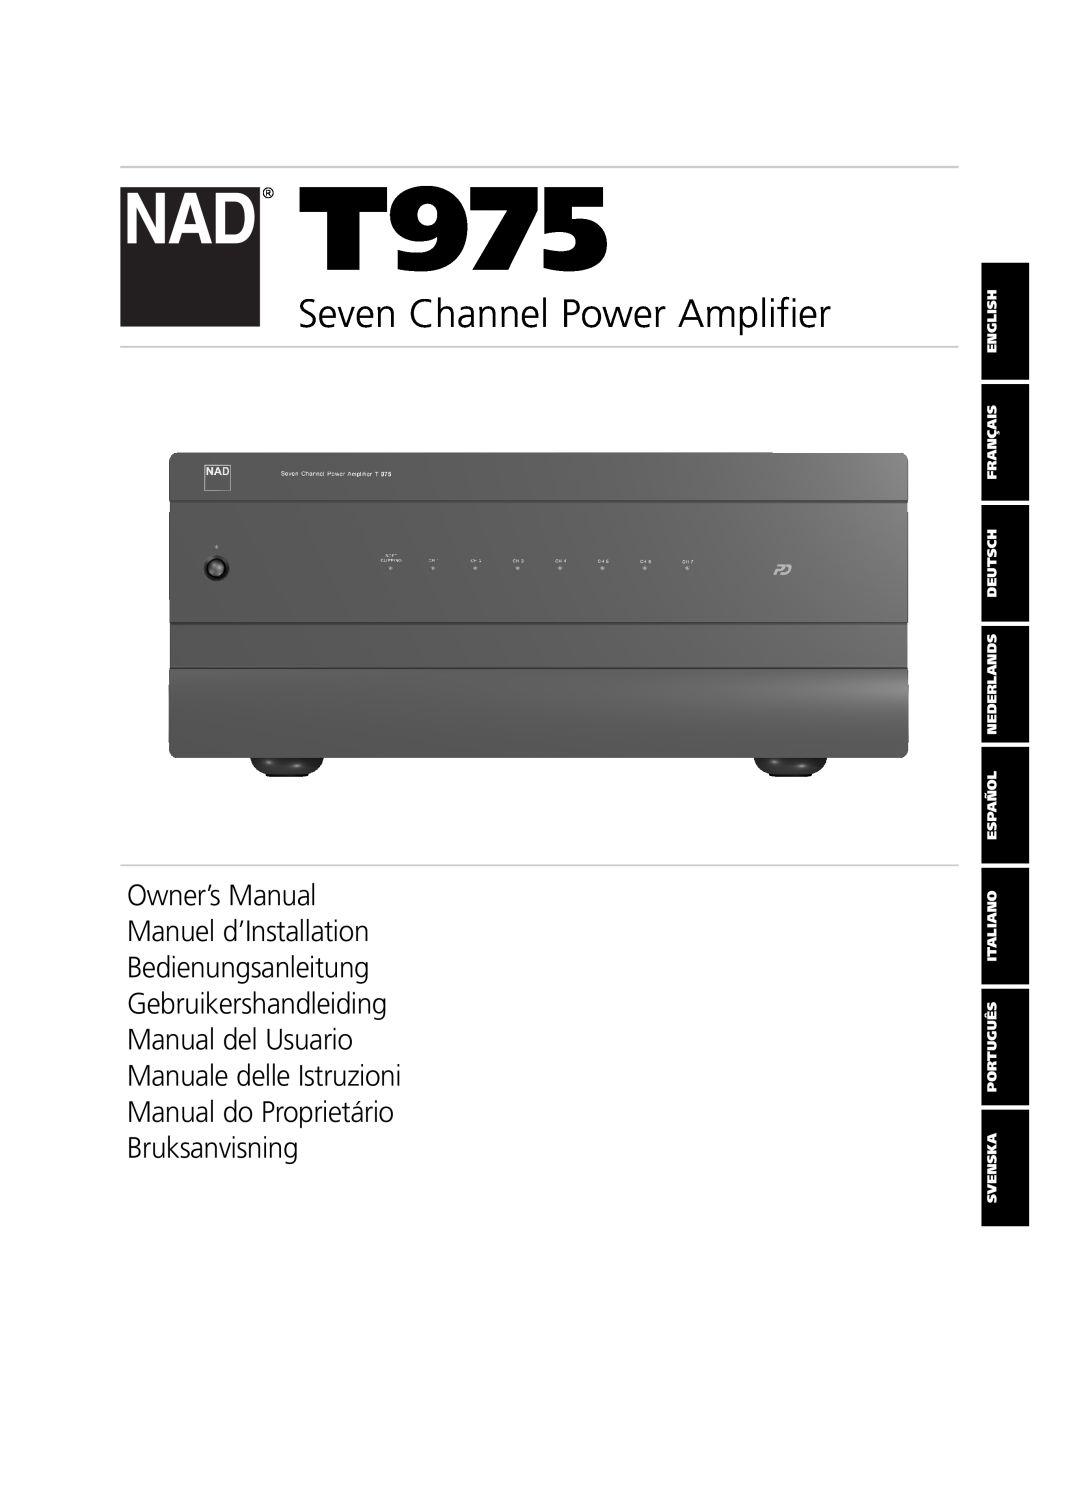 NAD T975 owner manual Seven Channel Power Amplifier, Owner’s Manual Manuel d’Installation 